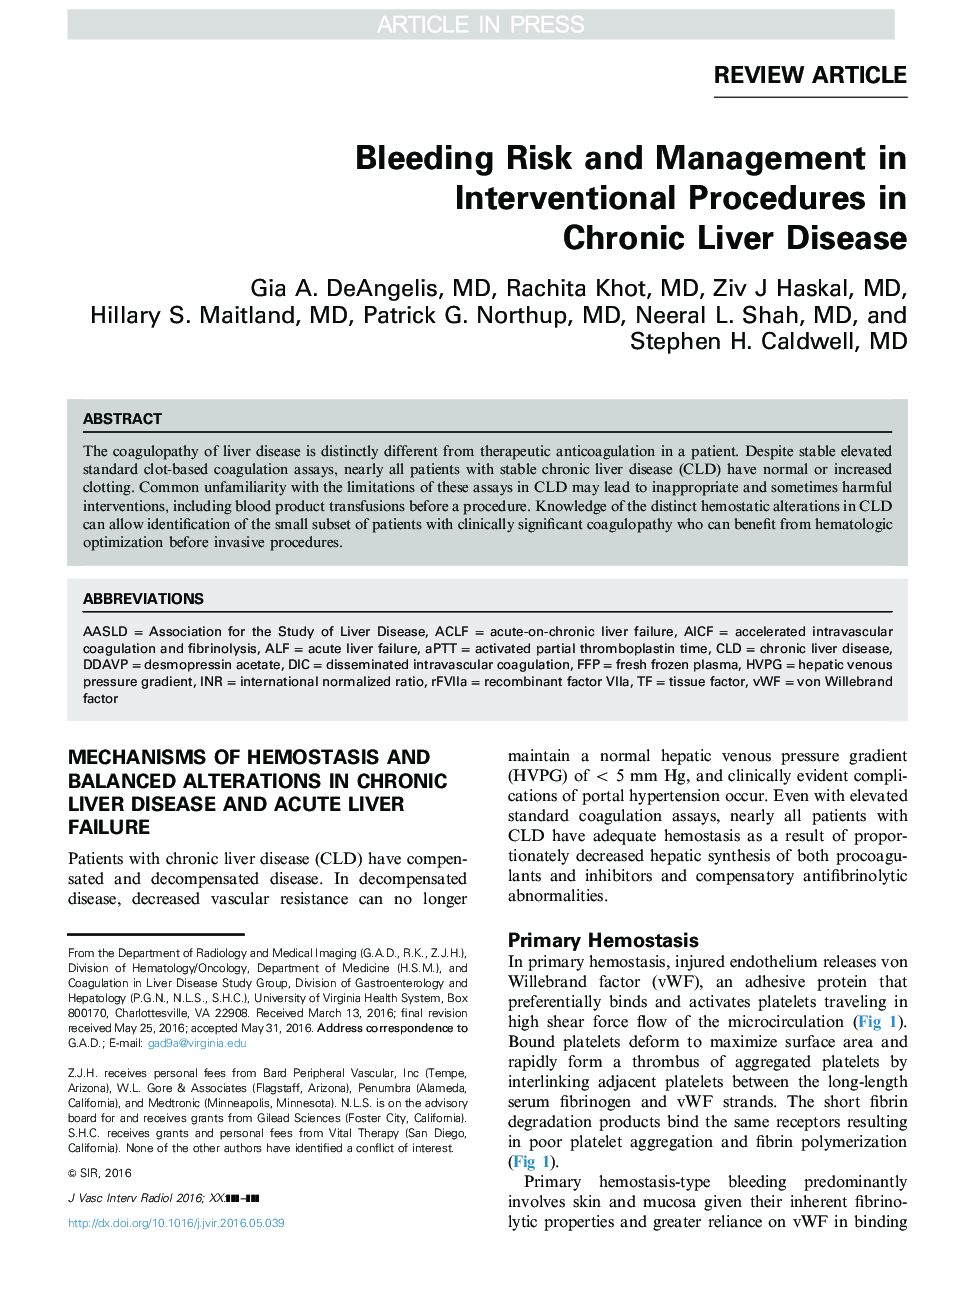 Bleeding Risk and Management in Interventional Procedures in Chronic Liver Disease